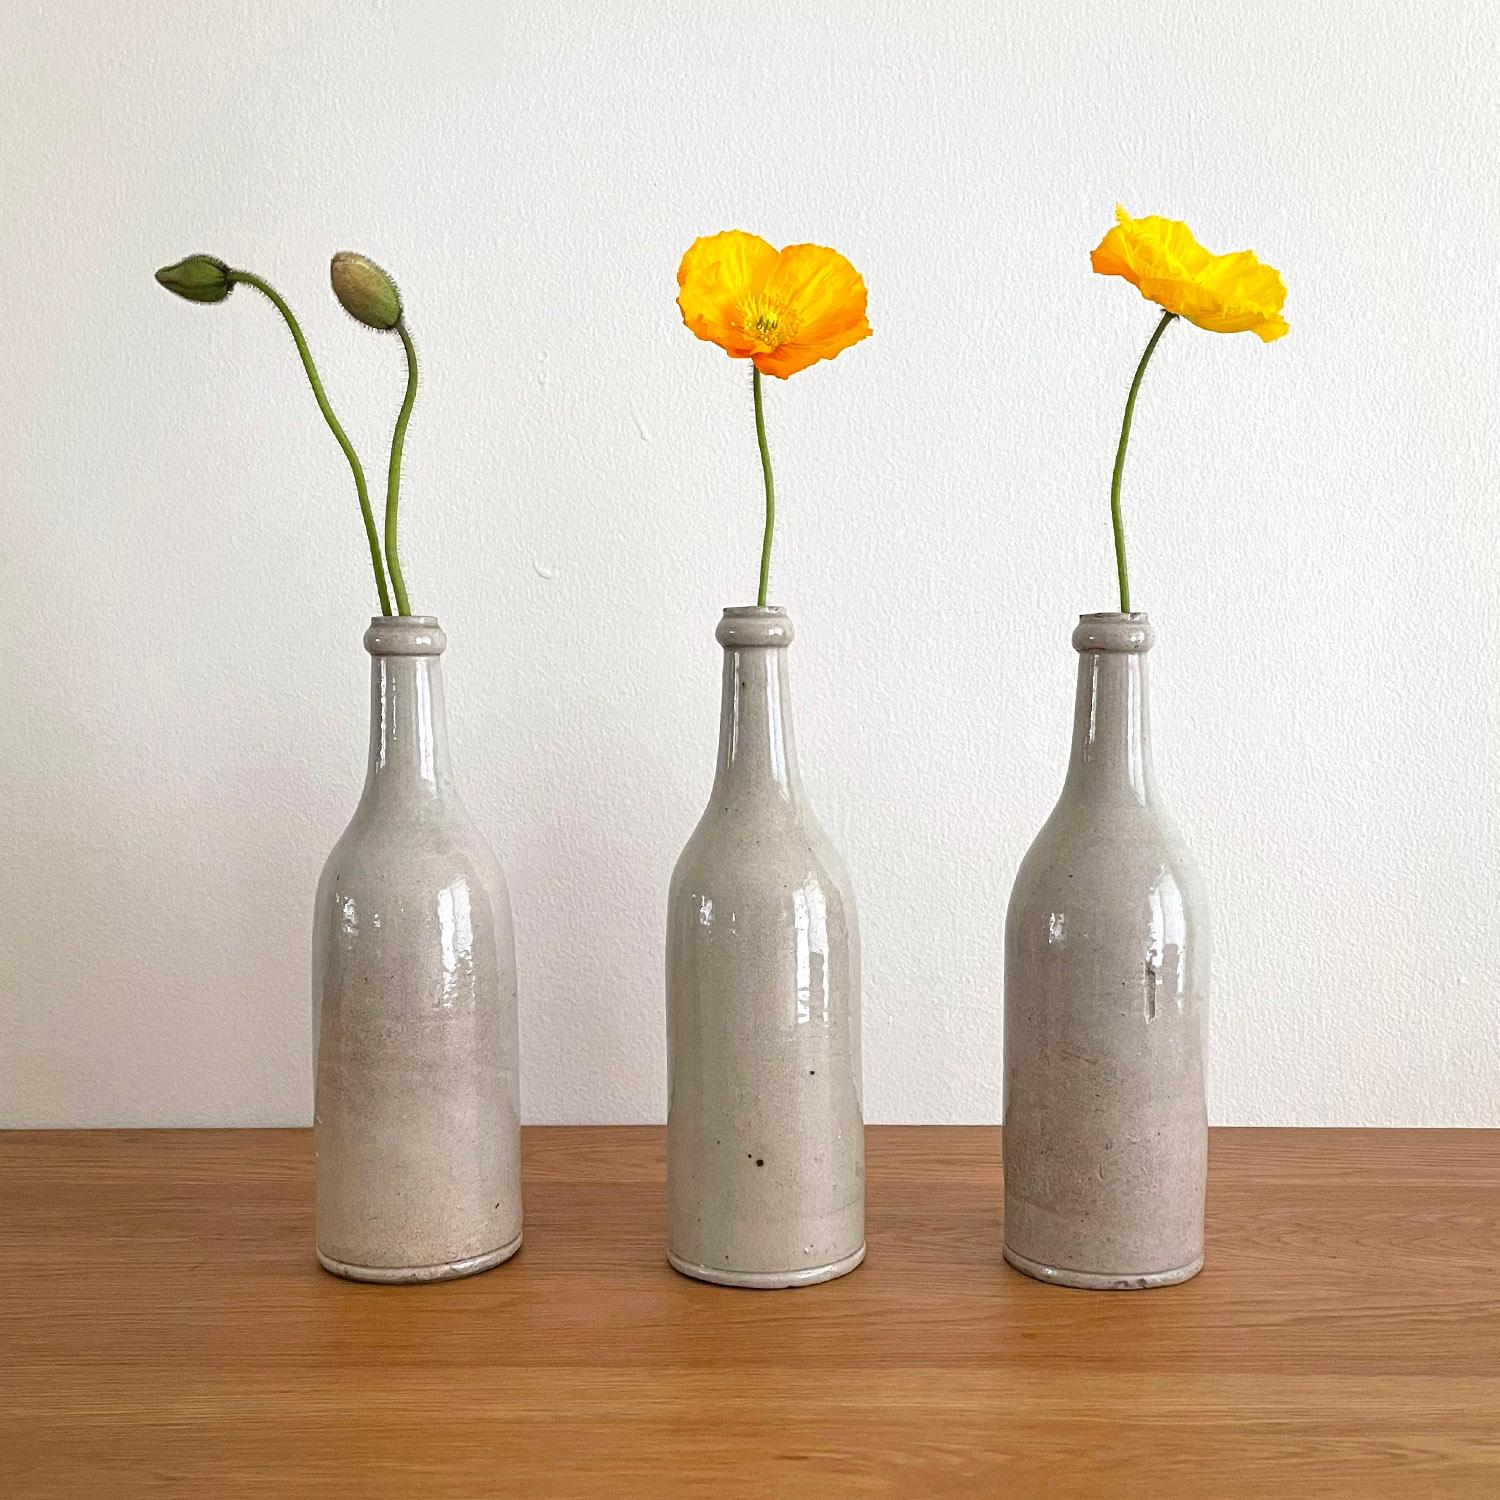 French stoneware wine bottles
Organic composition and feel 
Naturally occurring imperfections 
Various degrees patina which add to the character of each bottle'=
Perfectly imperfect
Additional photos upon request
Please note, these bottles have not